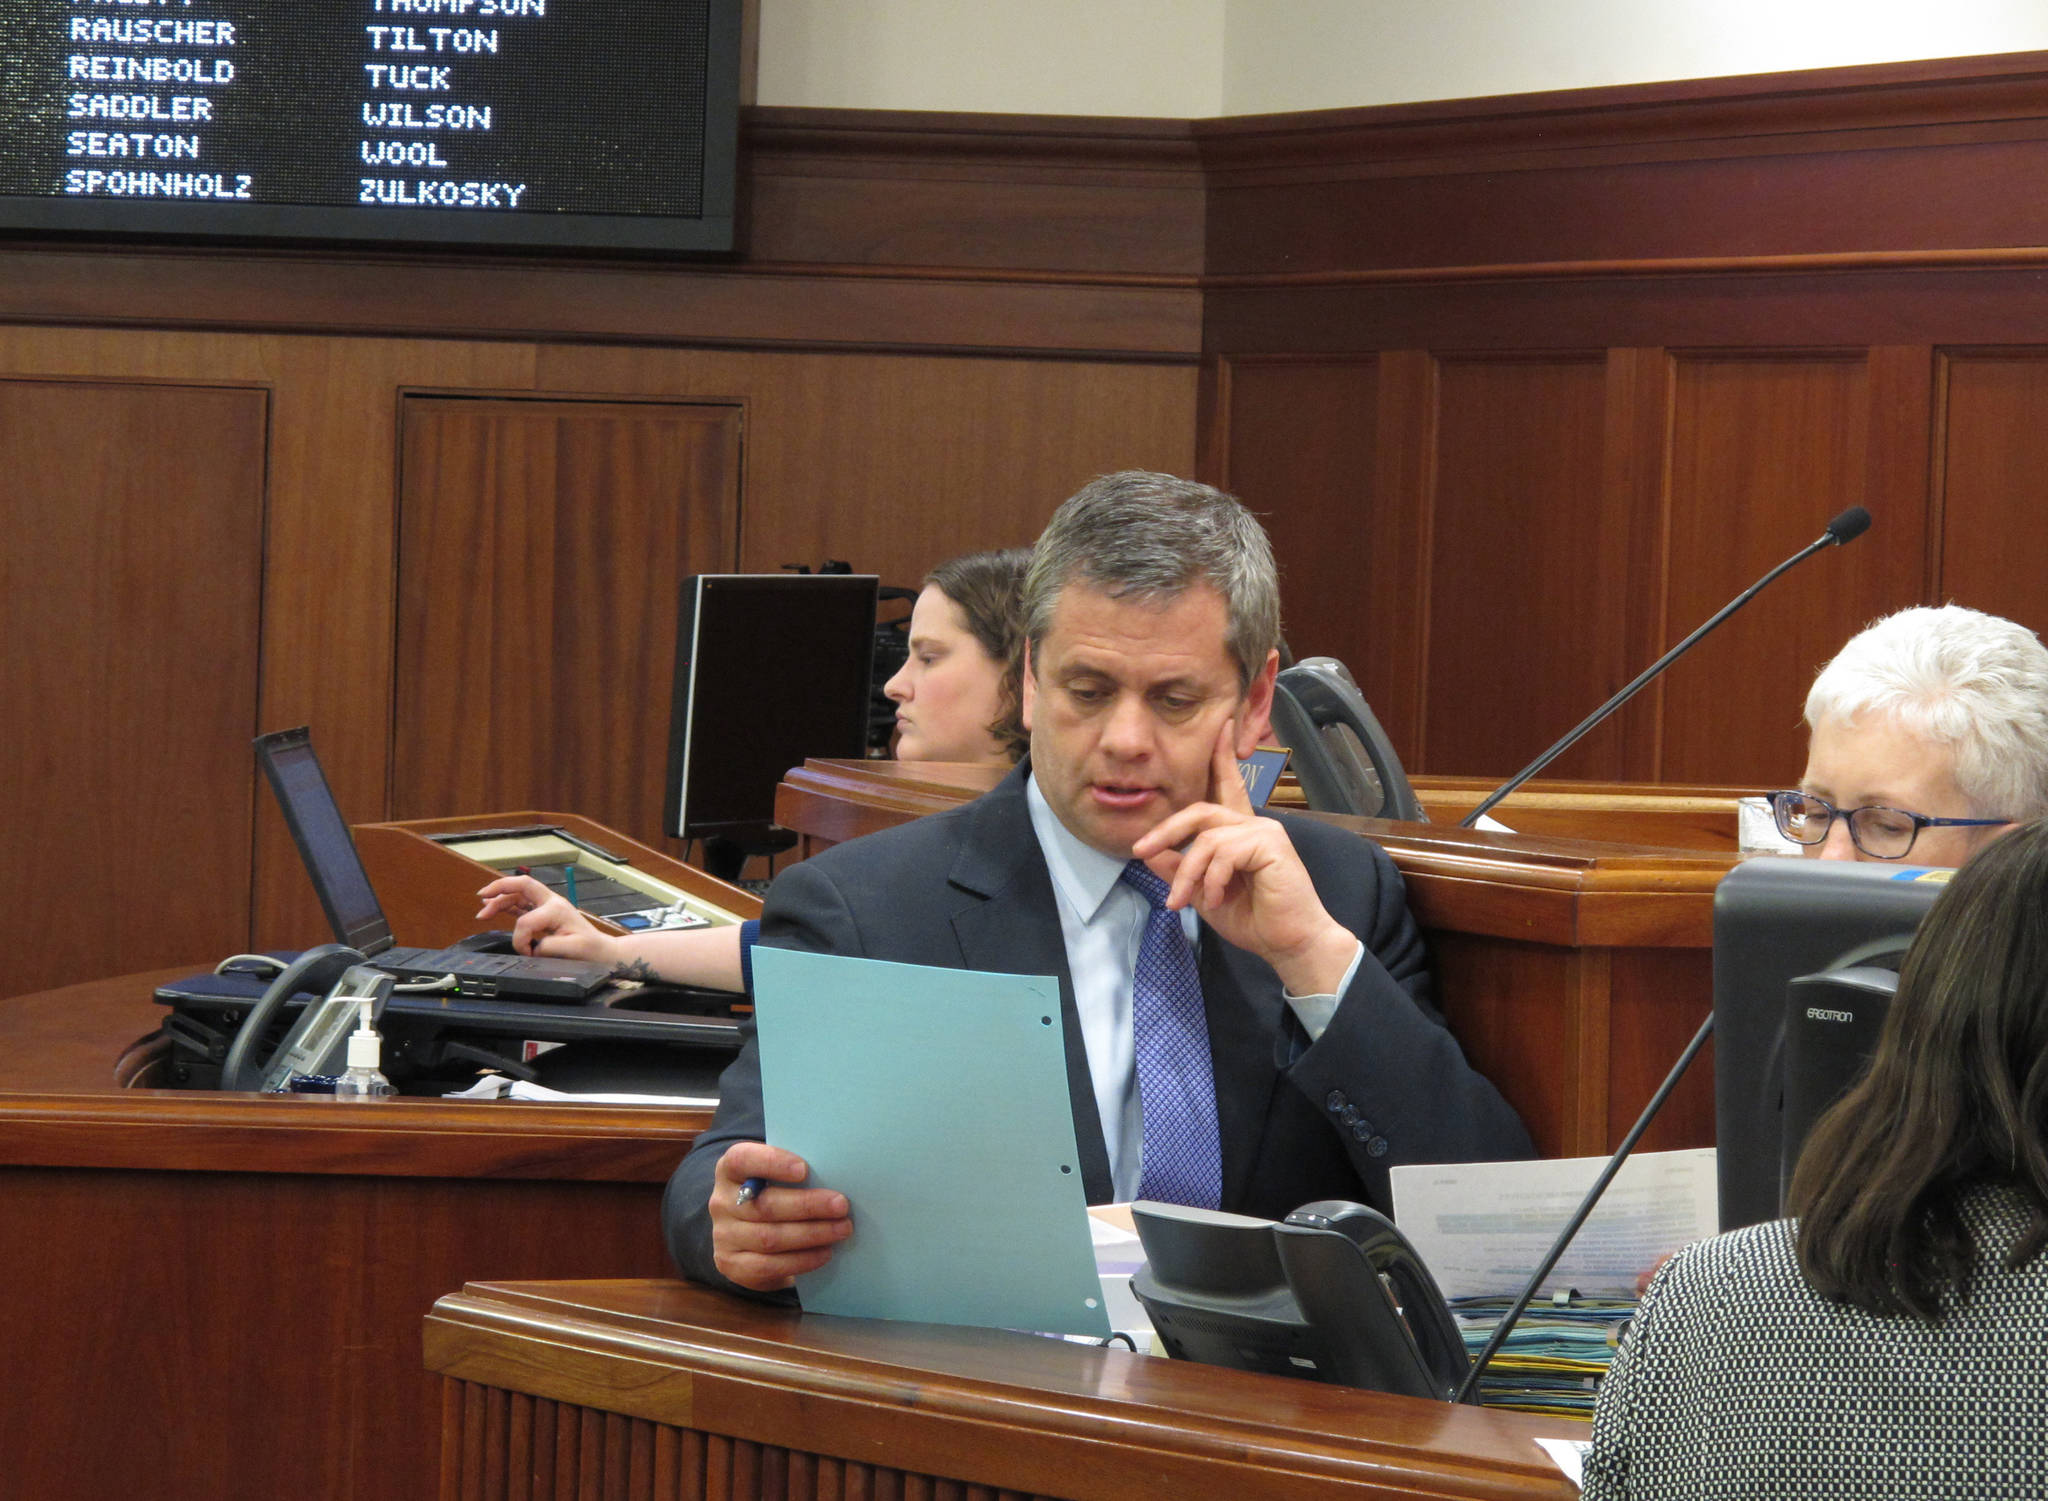 In this May 12, 2018, file photo, Alaska House Minority Leader Chris Tuck looks over a document during a break in the Alaska House floor session in Juneau. (AP Photo/Becky Bohrer, File)                                In this May 12, 2018 file photo, Alaska House Minority Leader Chris Tuck looks over a document during a break in the Alaska House floor session in Juneau, Alaska. (AP Photo/Becky Bohrer, File)